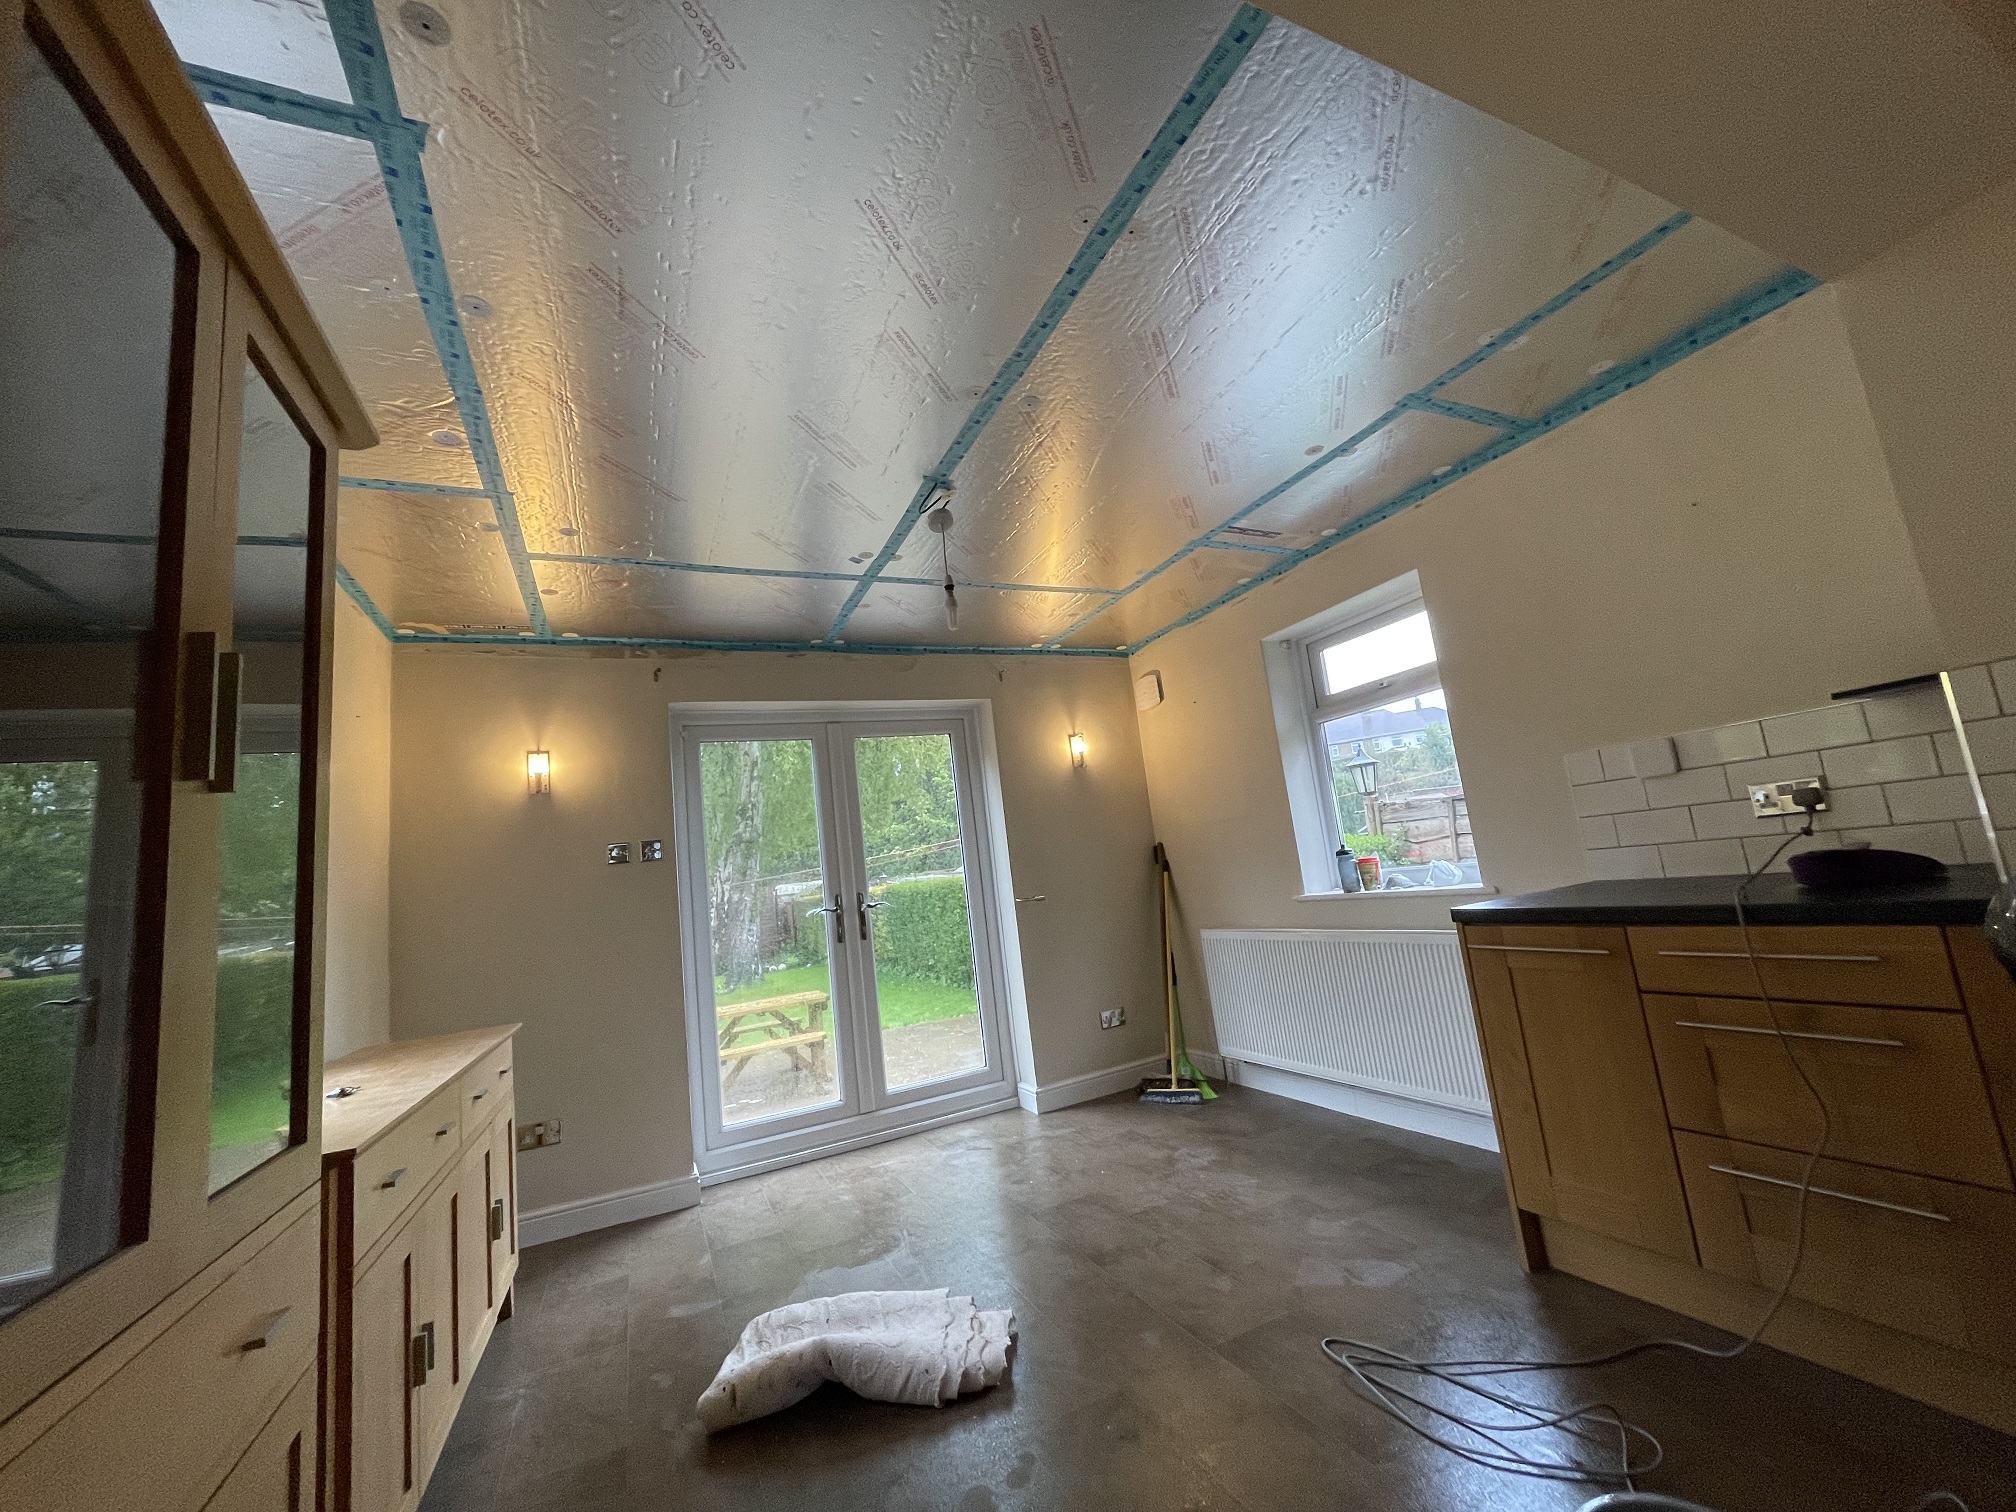 Photo of a home retrofit project with ceiling insulation